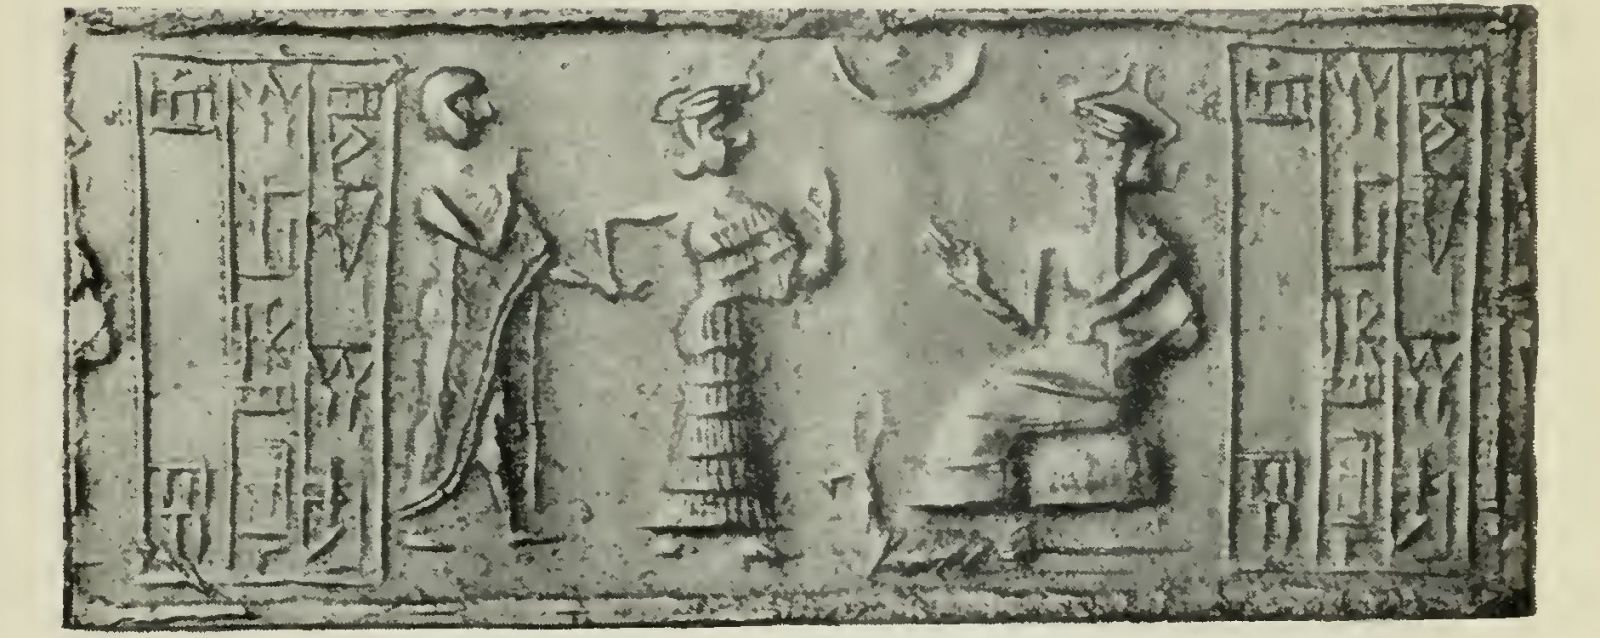 Fig. 2. Ea, the God of Water 